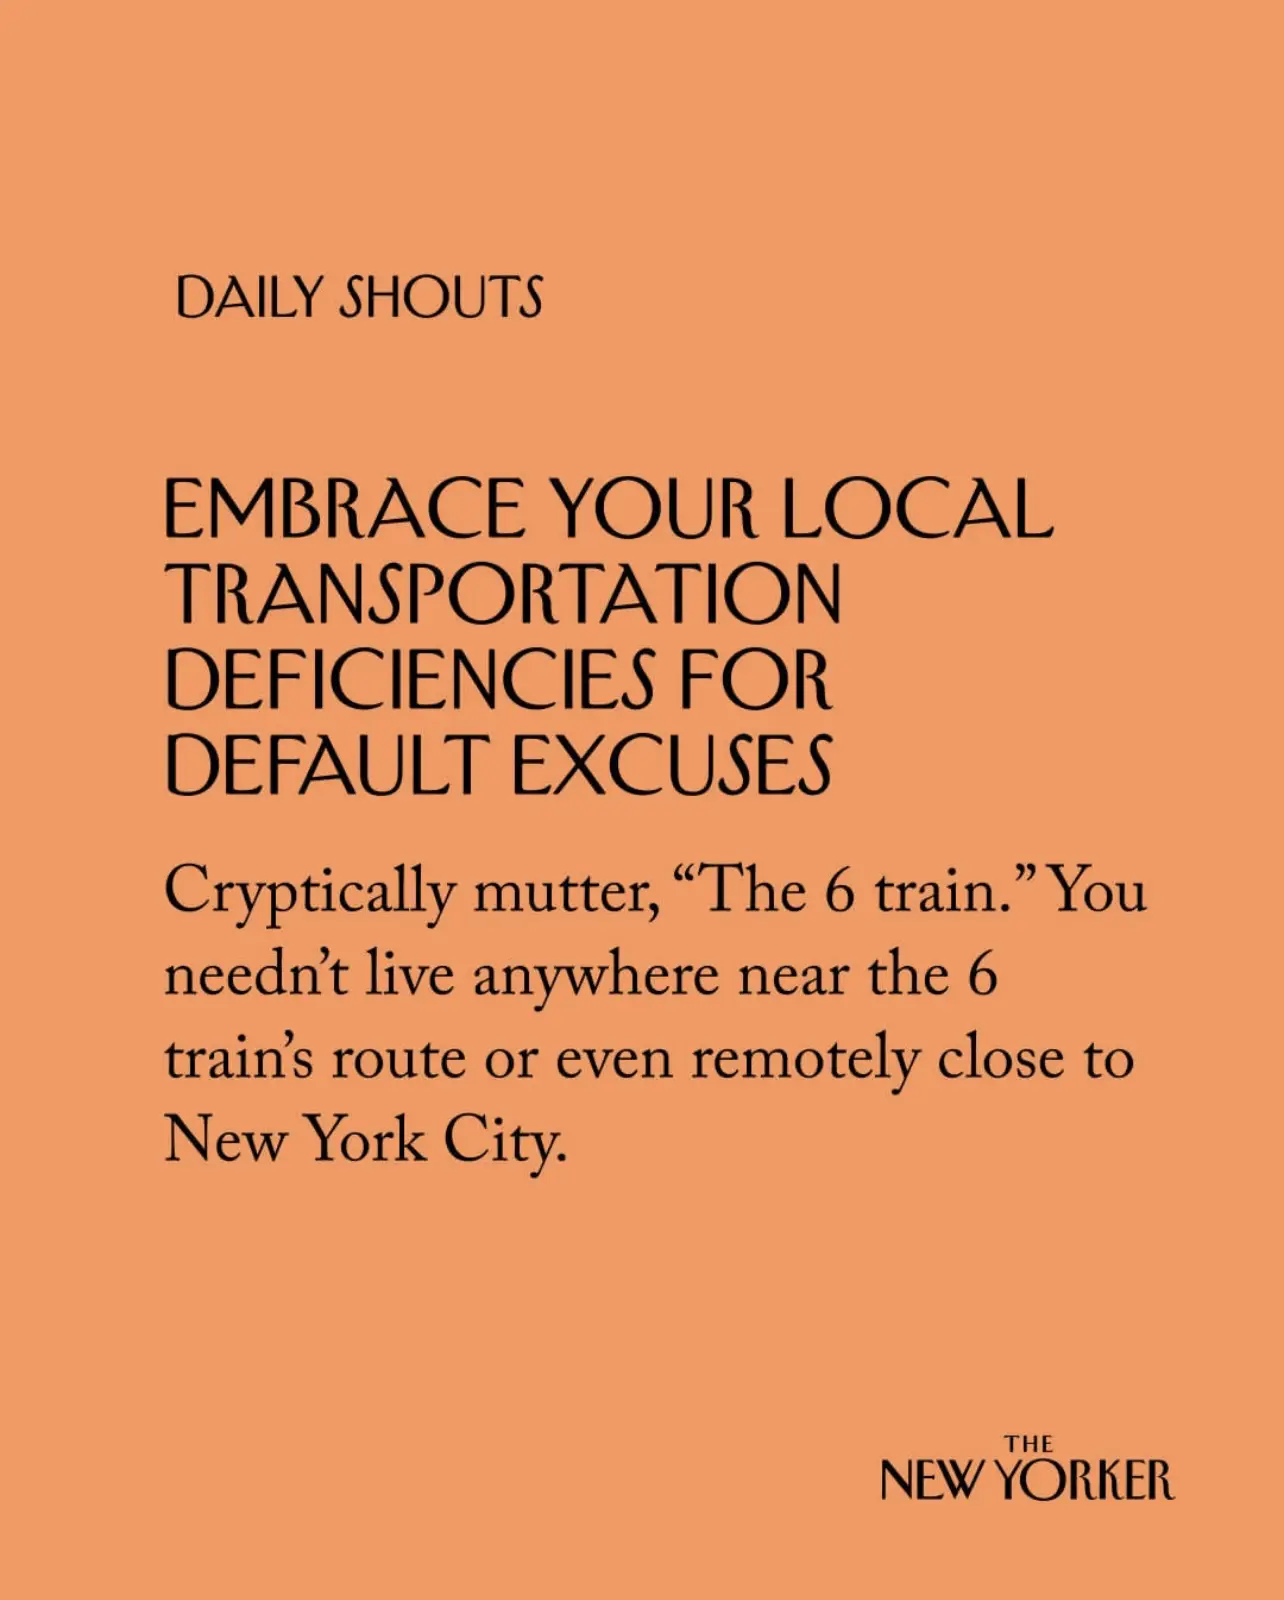  A daily shout that says "embrace your local transportation deficiencies for default excuses".